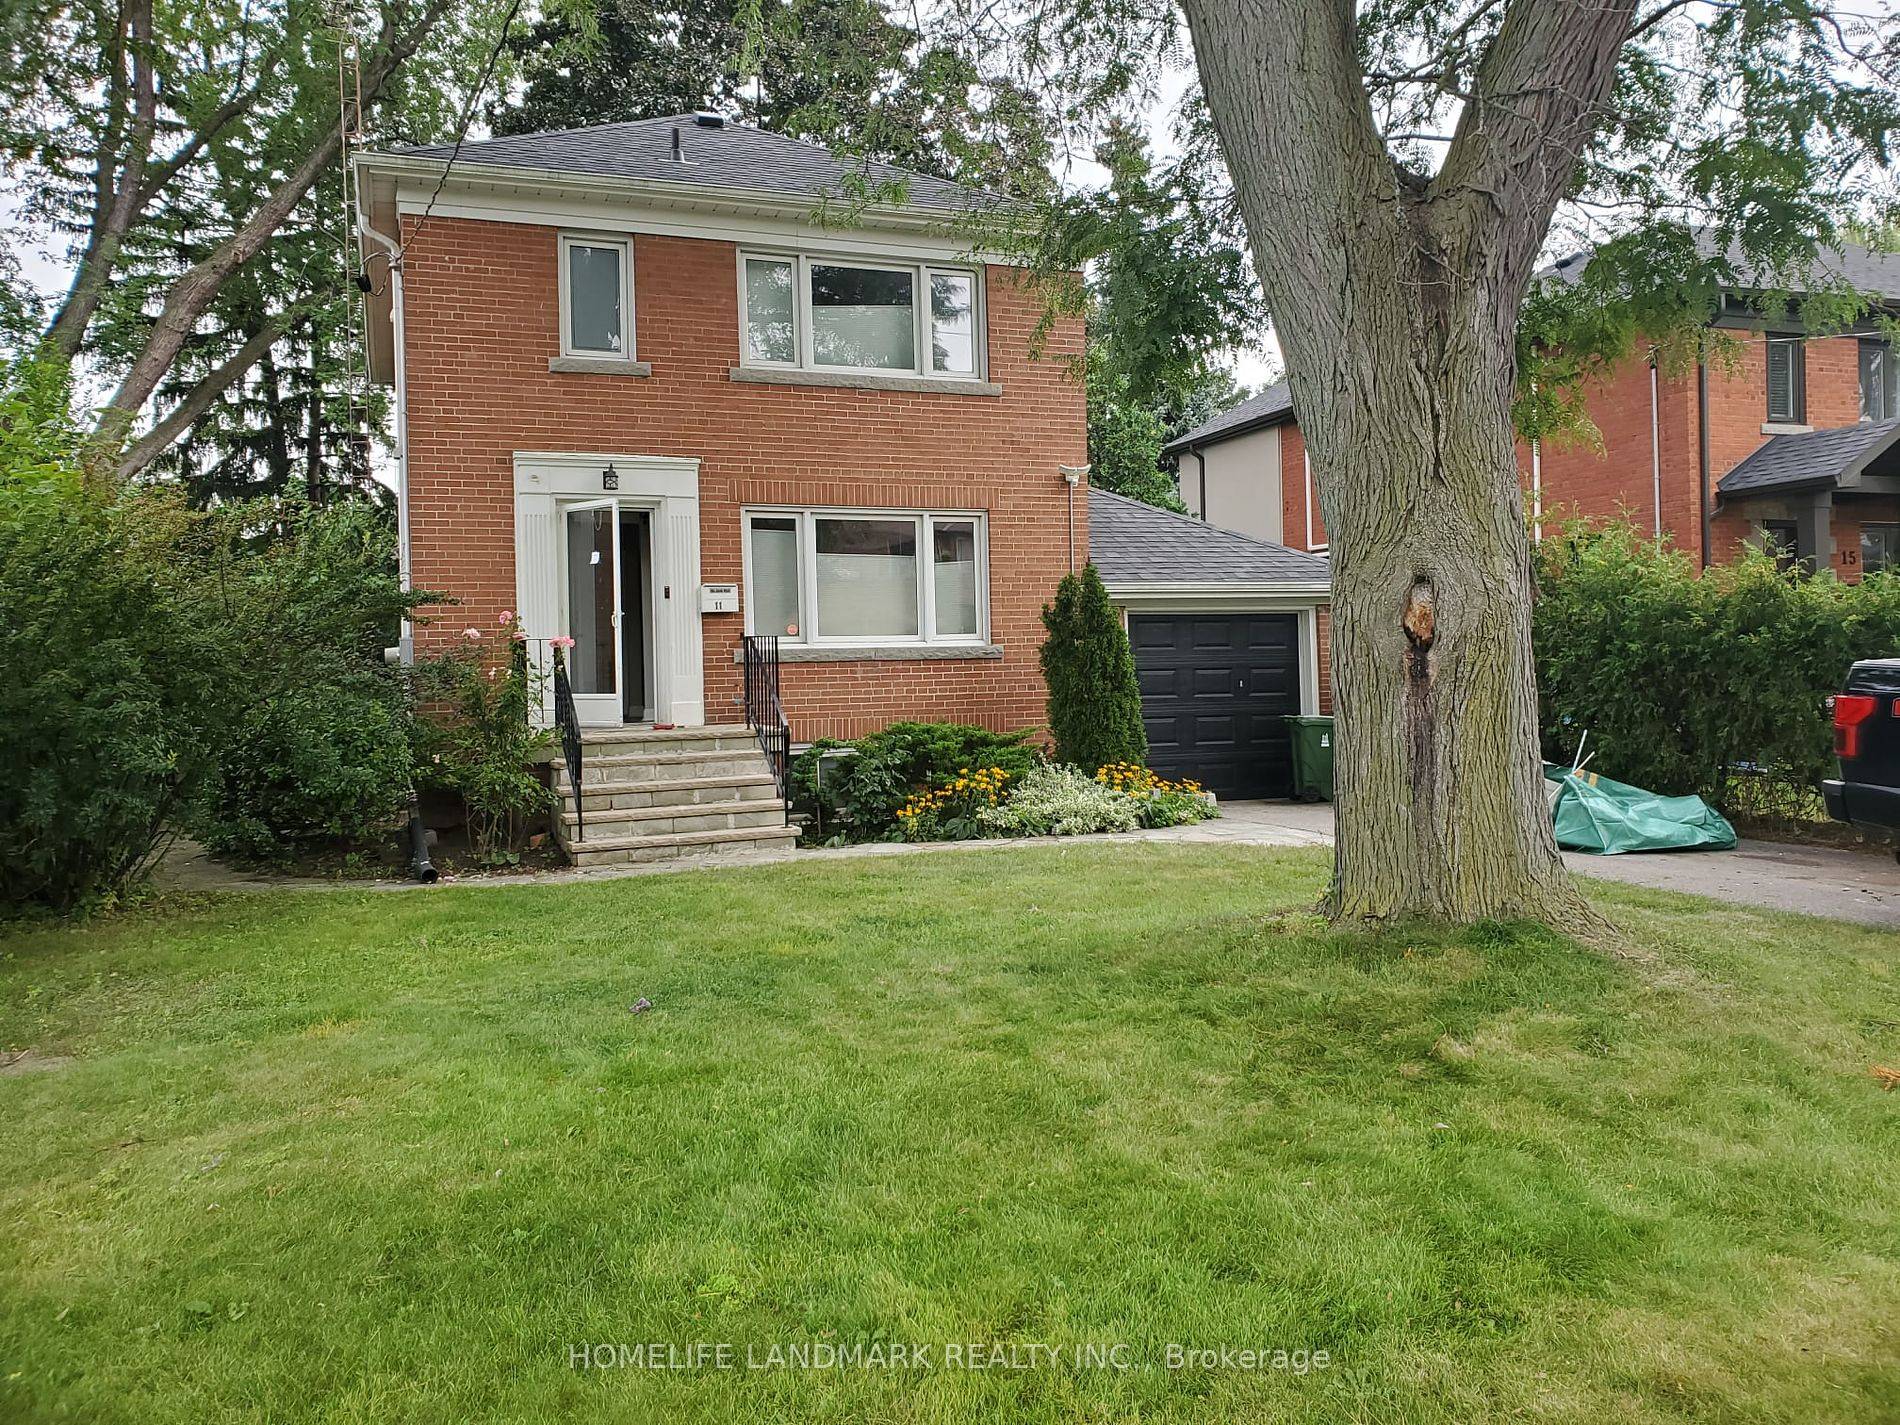 Main Second Level of Detached House on a Quite Tree Lined Street in a Prestigious Neighborhood.